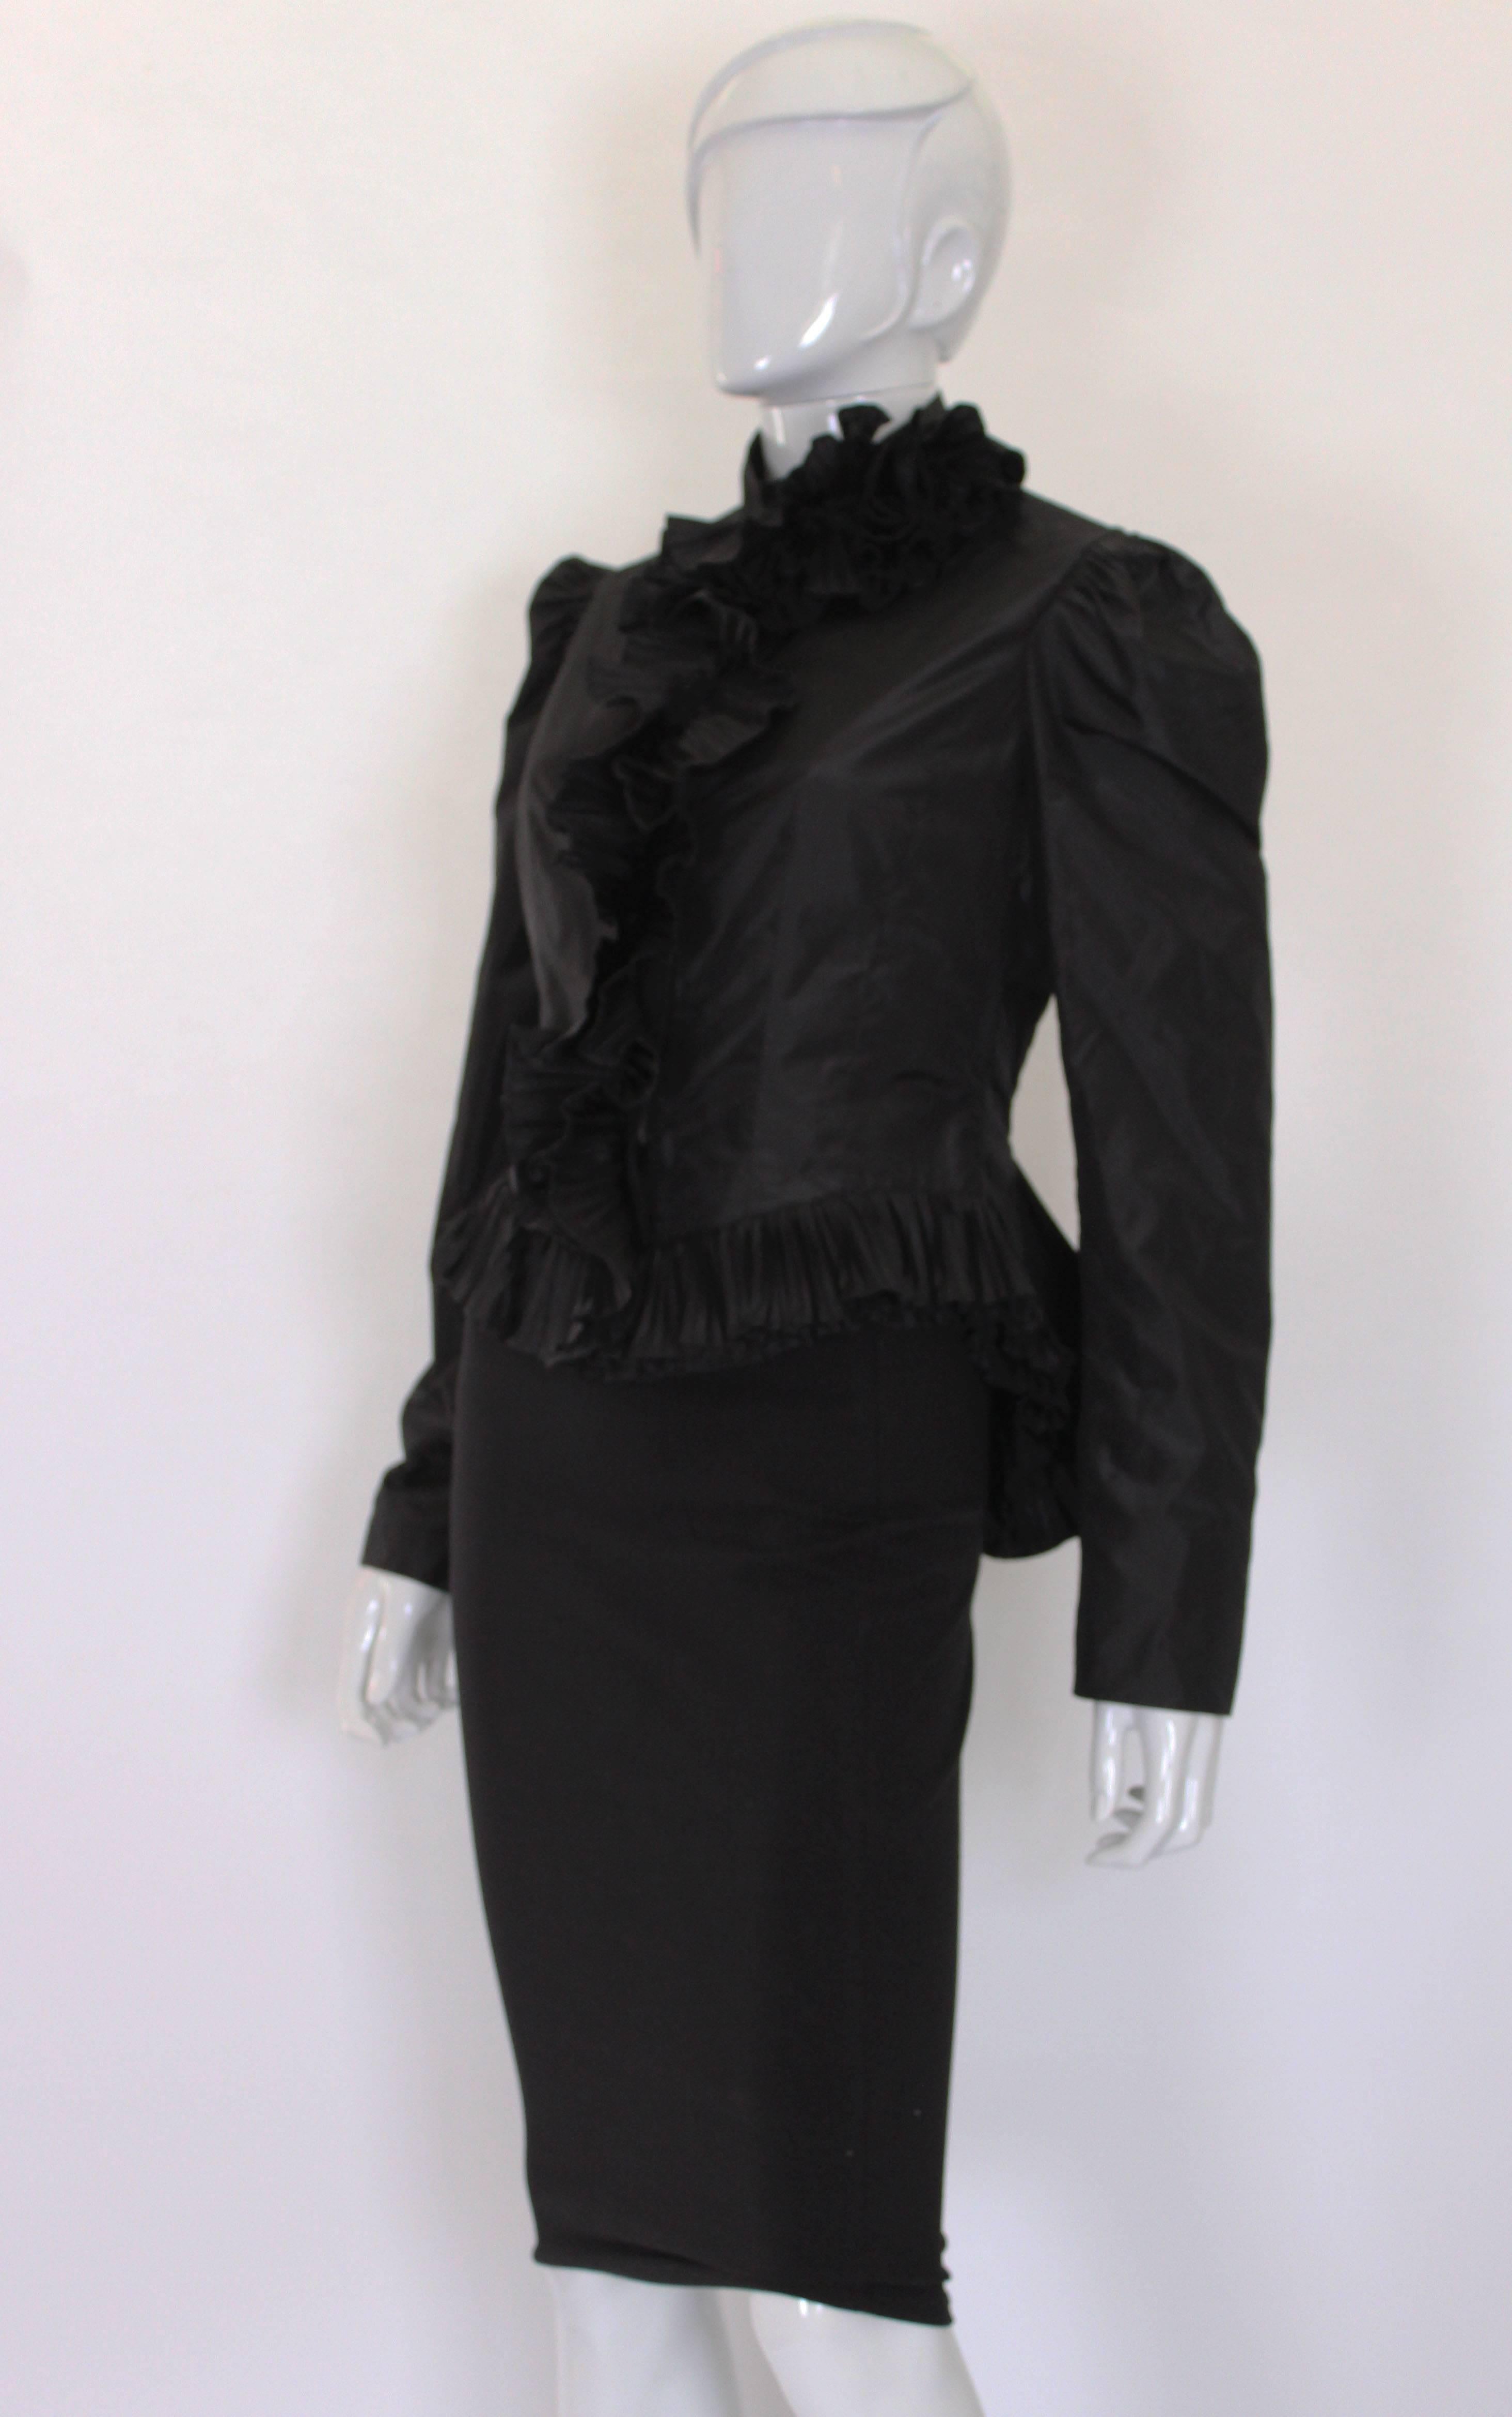 A great and gothic jacket by French designer Yves Saint Laurent, Rive Gauche.
This jacket has gathered shoulders, a nipped in waist and wonderful frilled peplum. The frilled peplum is 3'' .It has a zip opening , with the zip covered by a fold and a